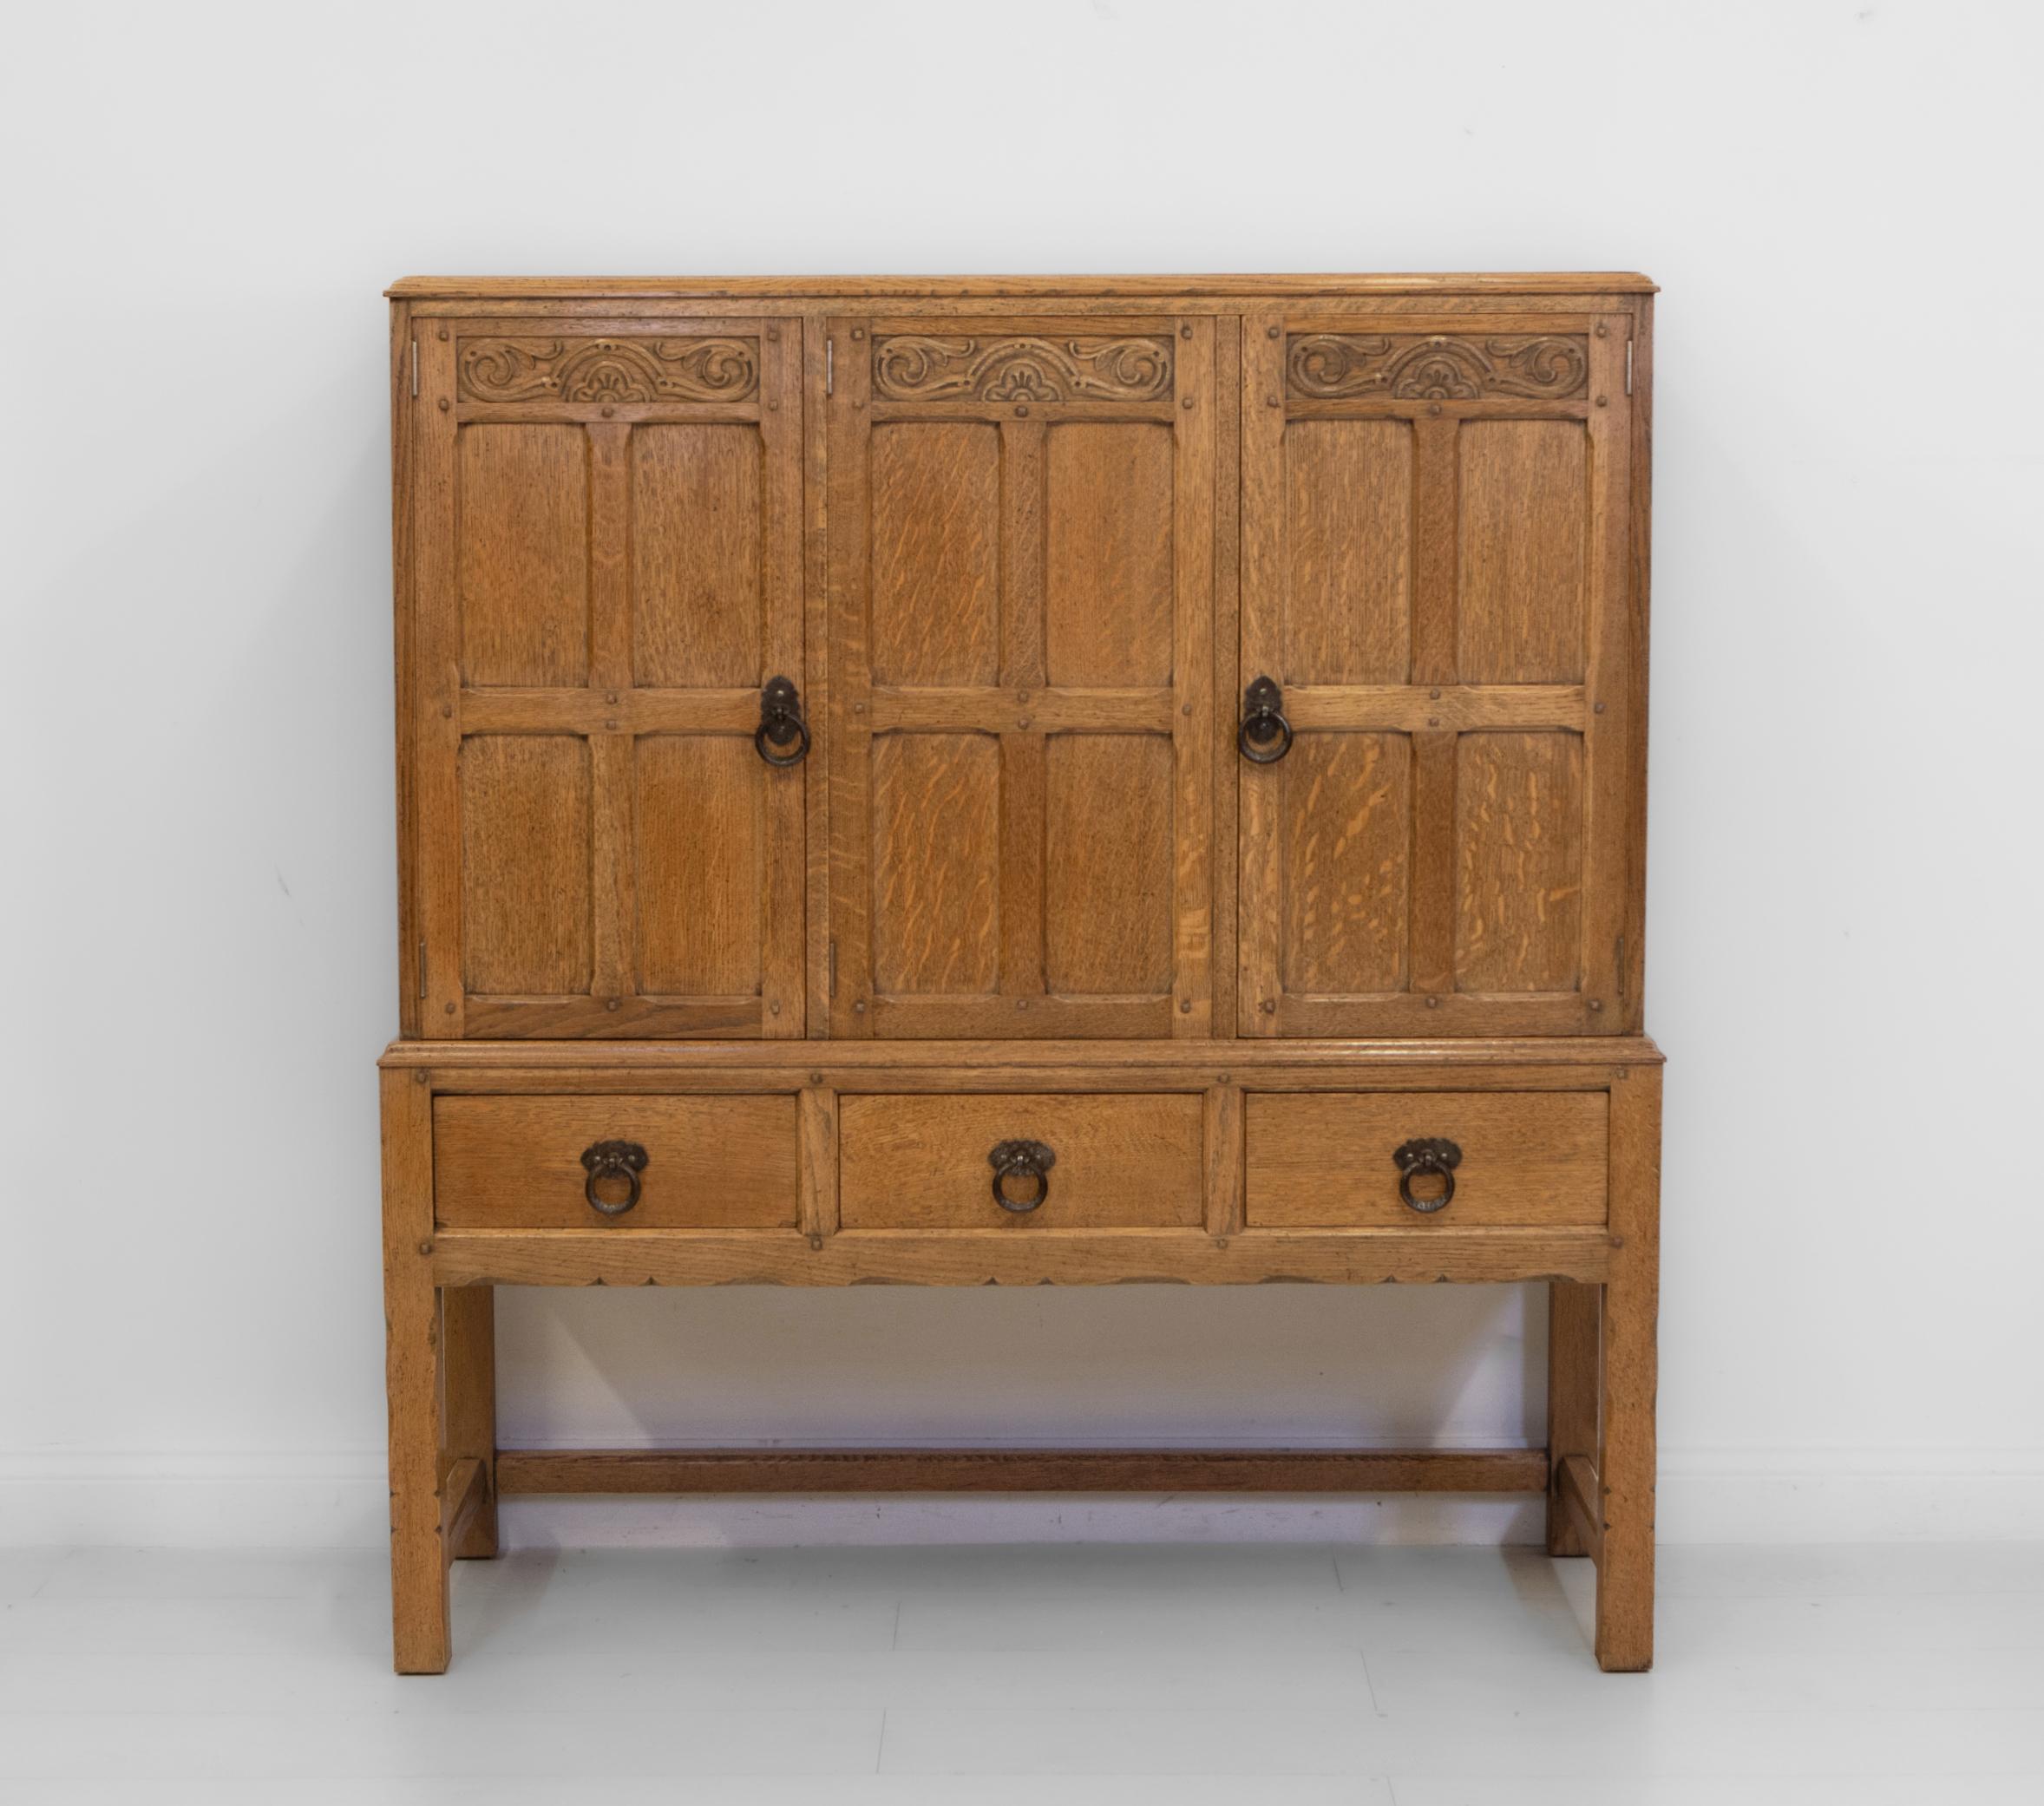 Waring & Gillow Oak Cotswold School Manner Arts And Crafts Cabinet Circa 1920 For Sale 9